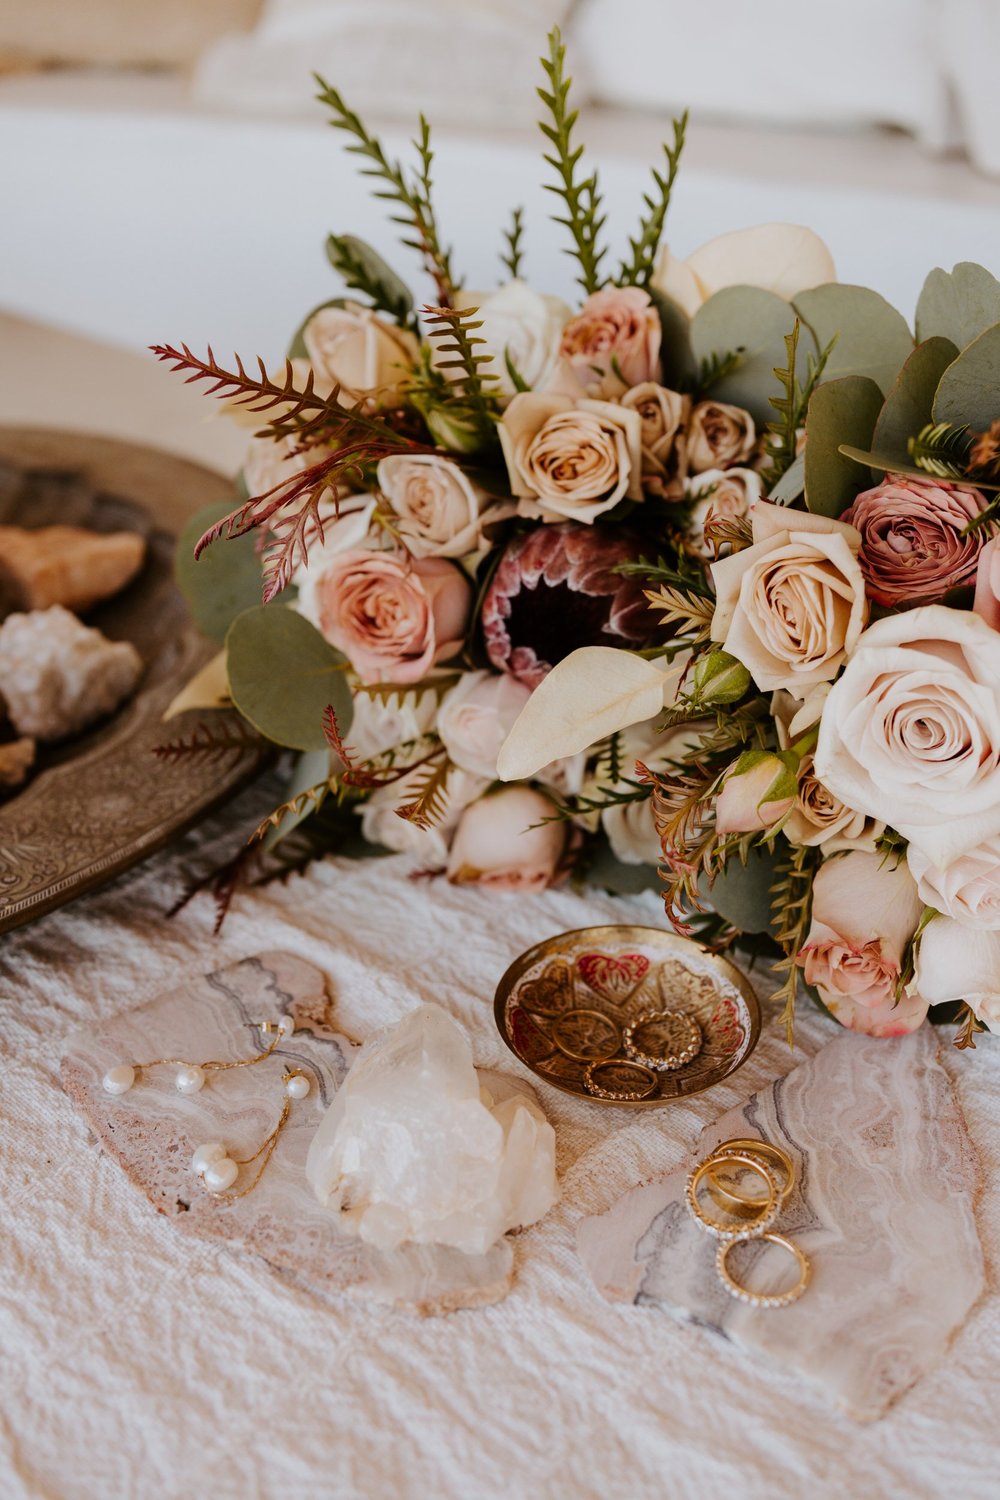 Desert wedding bouquet and bridal jewelry details, Photo by Tida Svy